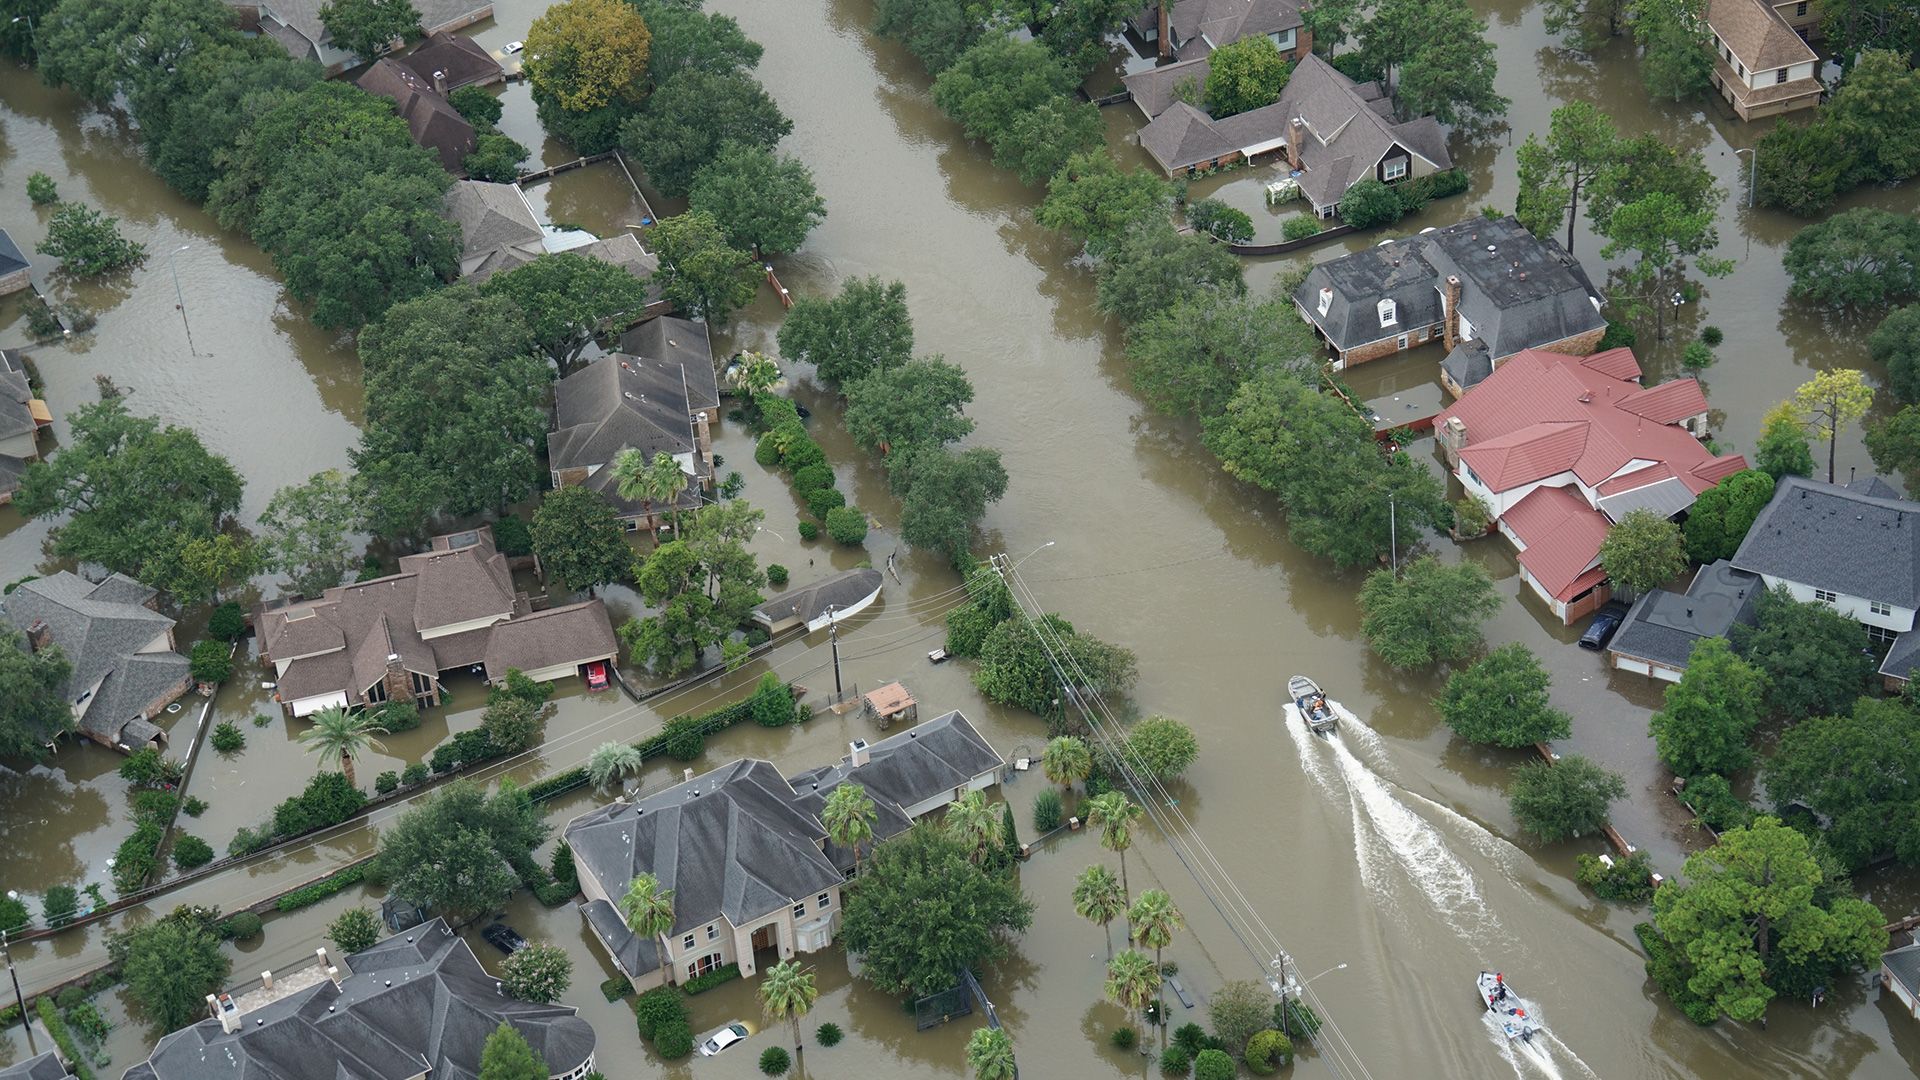 After the immediate damage from a large hurricane, many hazards remain from flooding and standing waters. 